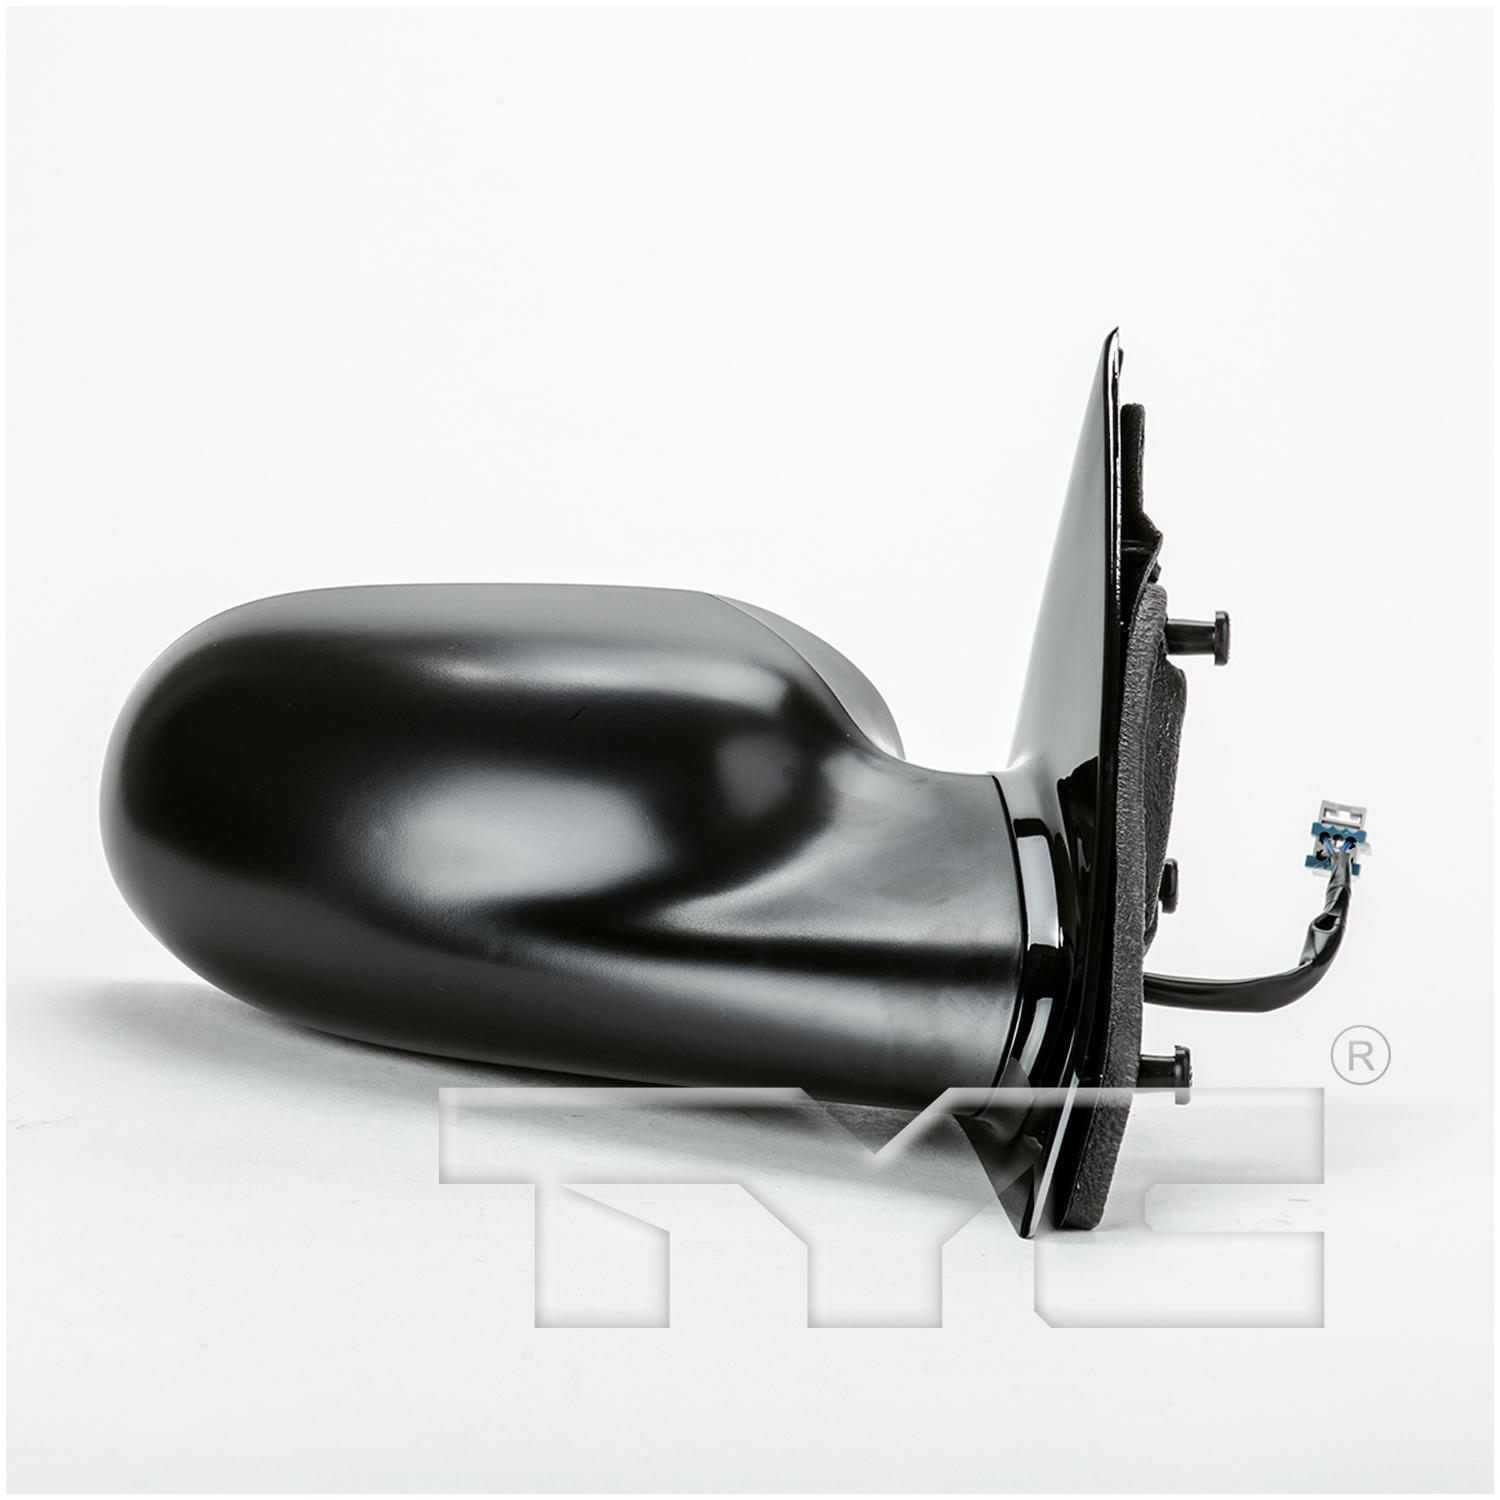 Aftermarket MIRRORS for SATURN - LW300, LW300,01-03,RT Mirror outside rear view